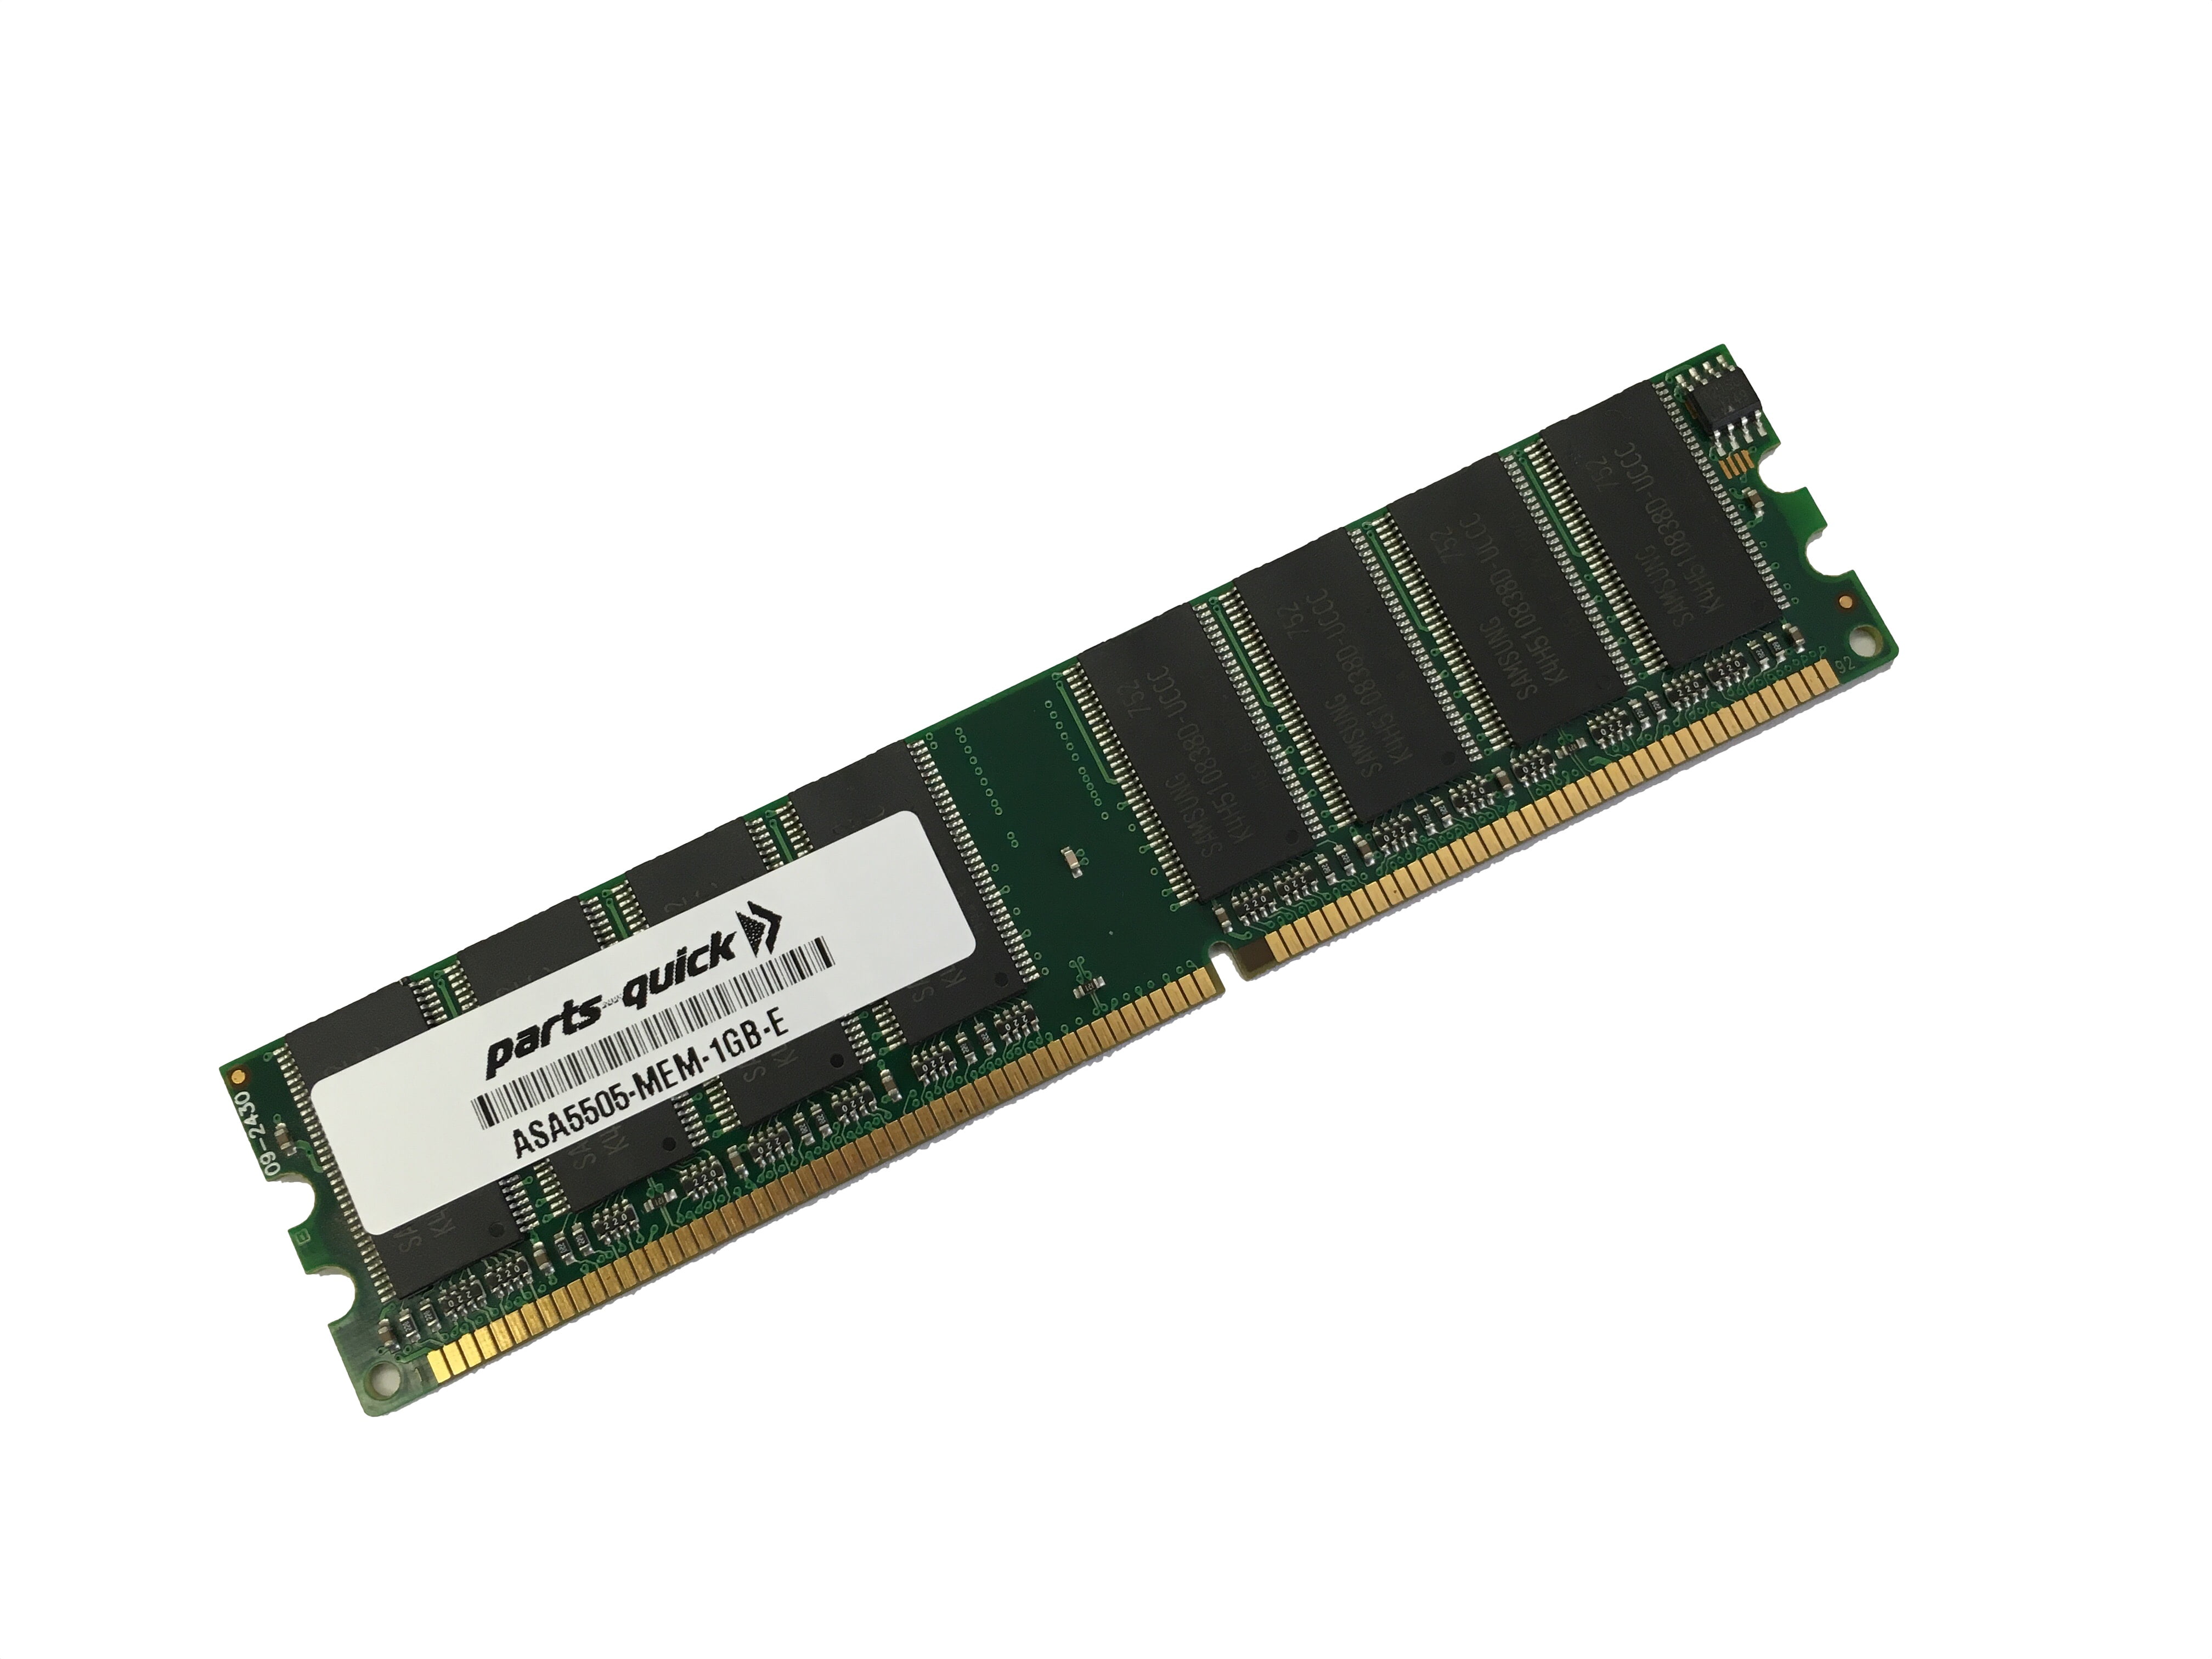 M-ASR1K-RP2-16GB 16GB Memory 3rd Party Upgrade For Cisco ASR1000-RP2 4x4GB 